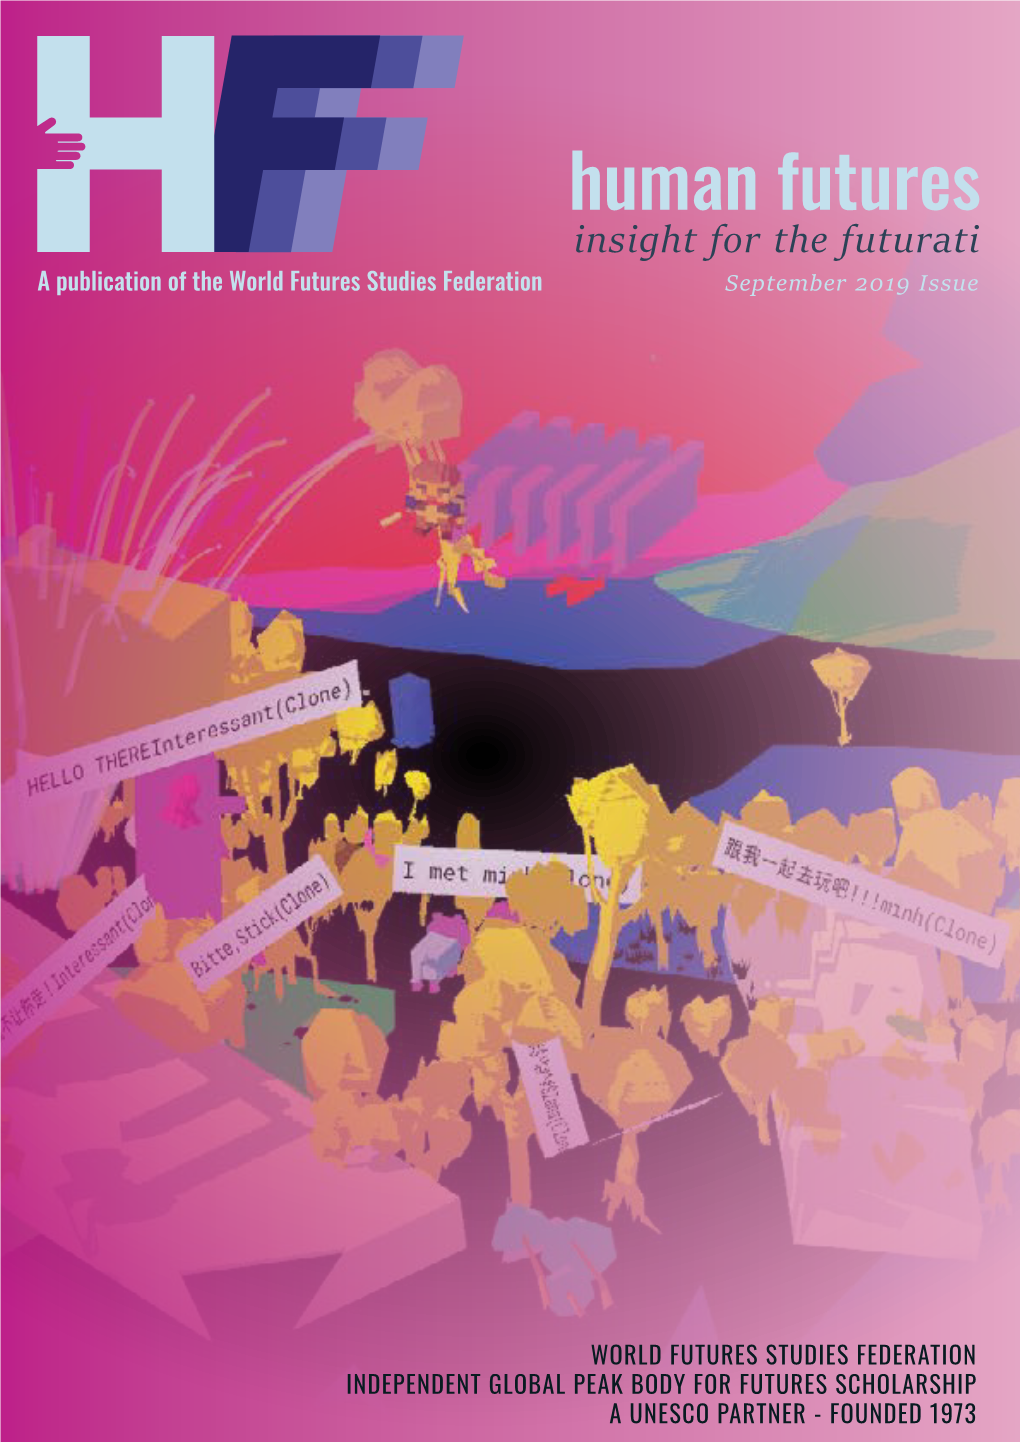 Human Futures Insight for the Futurati a Publication of the World Futures Studies Federation September 2019 Issue